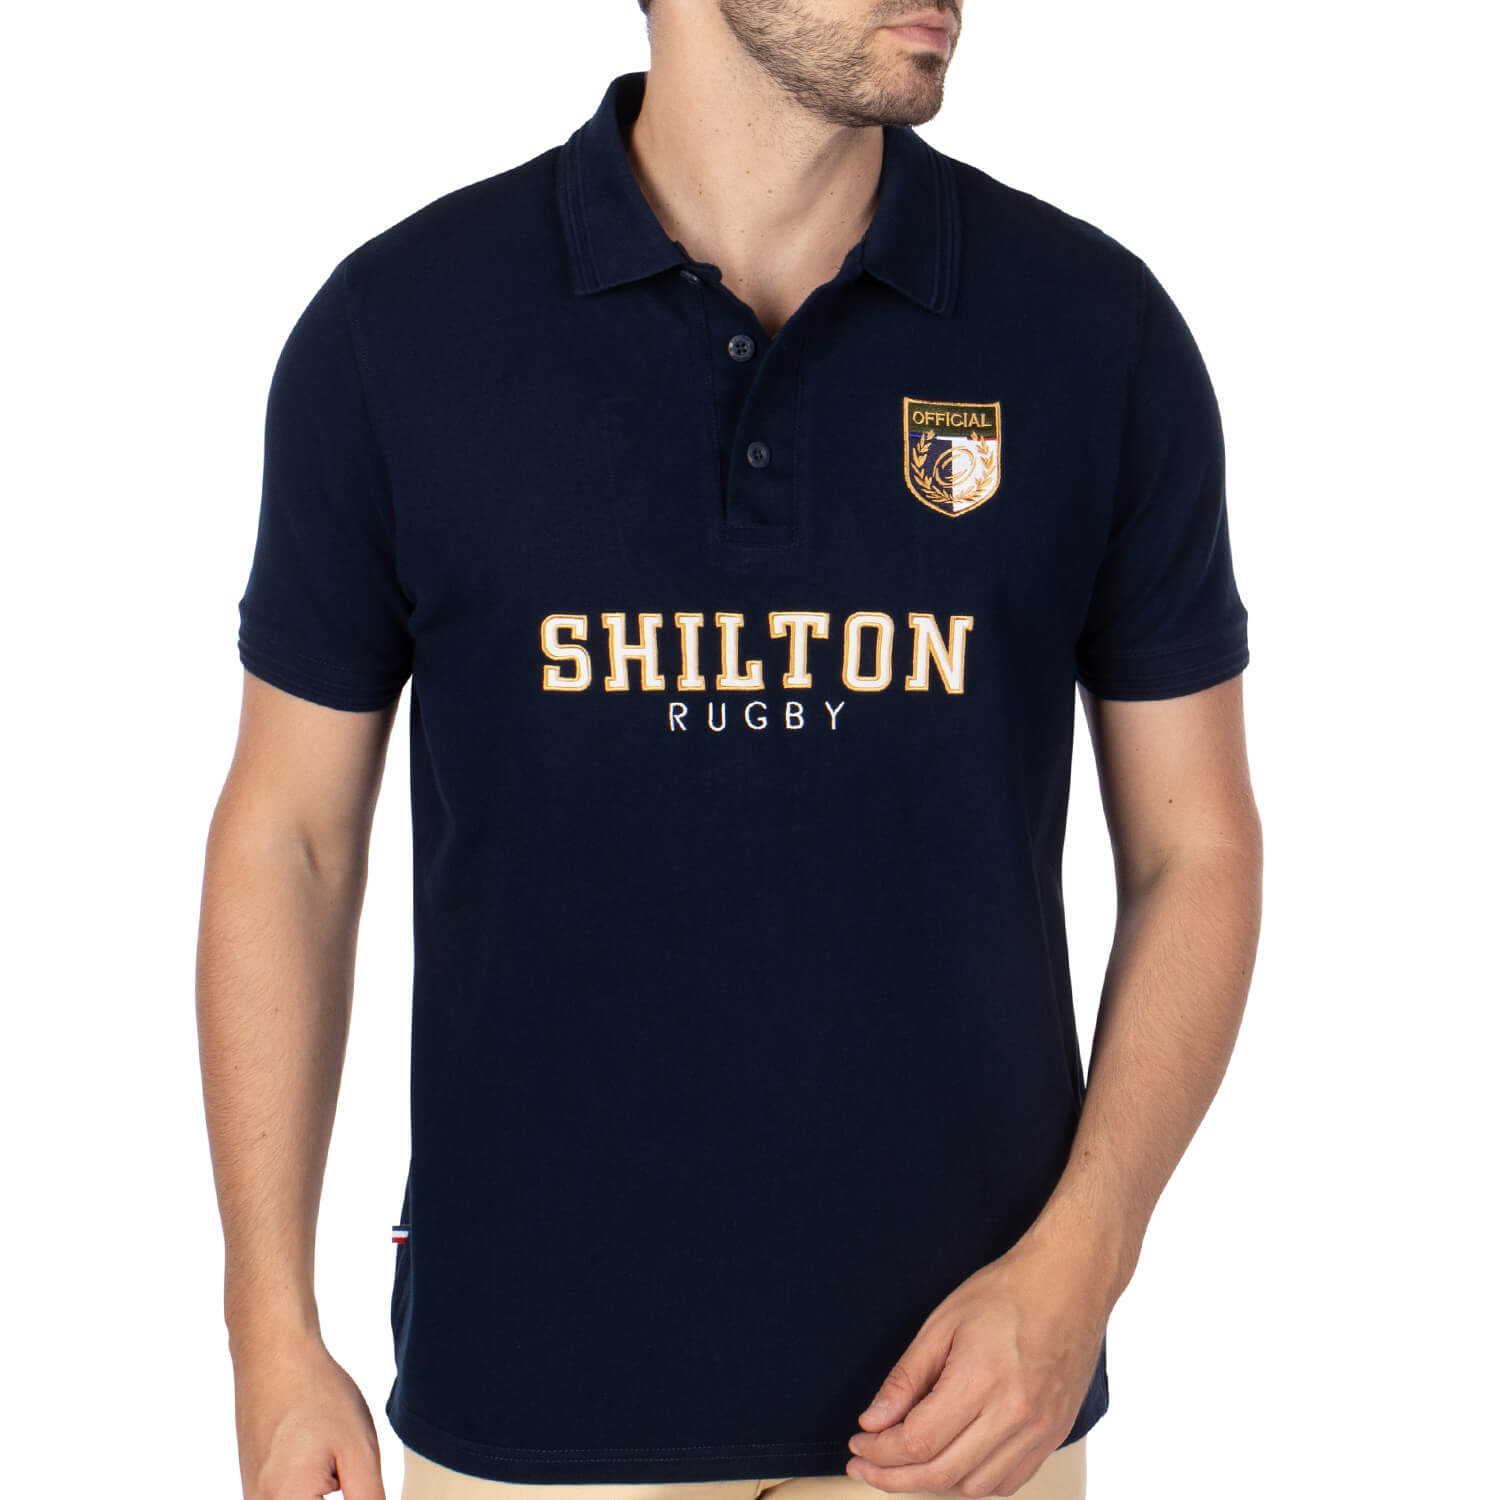 Polo rugby nations Navy - Shilton